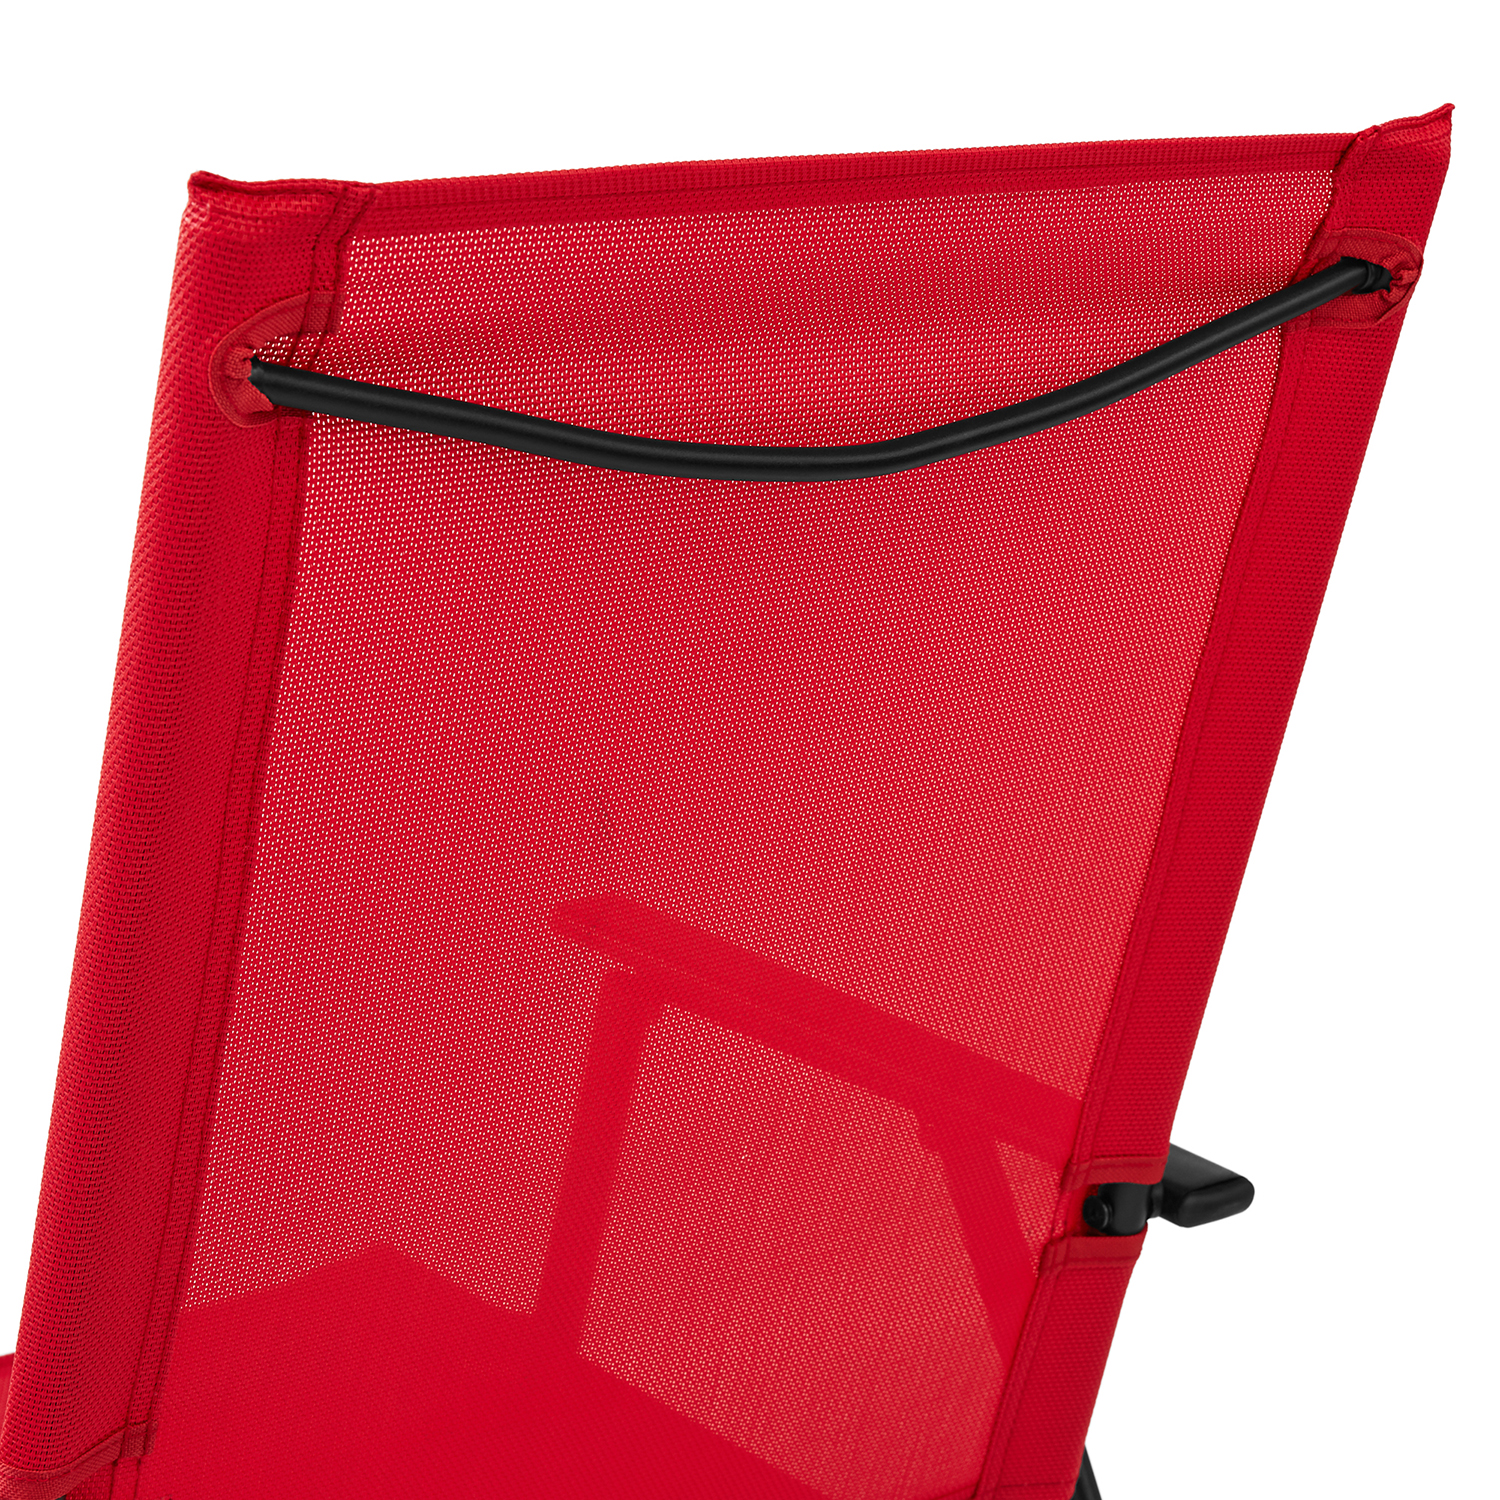 Mainstays Greyson Steel and Sling Folding Outdoor Patio Armchair - Set of 2, Red - image 2 of 8